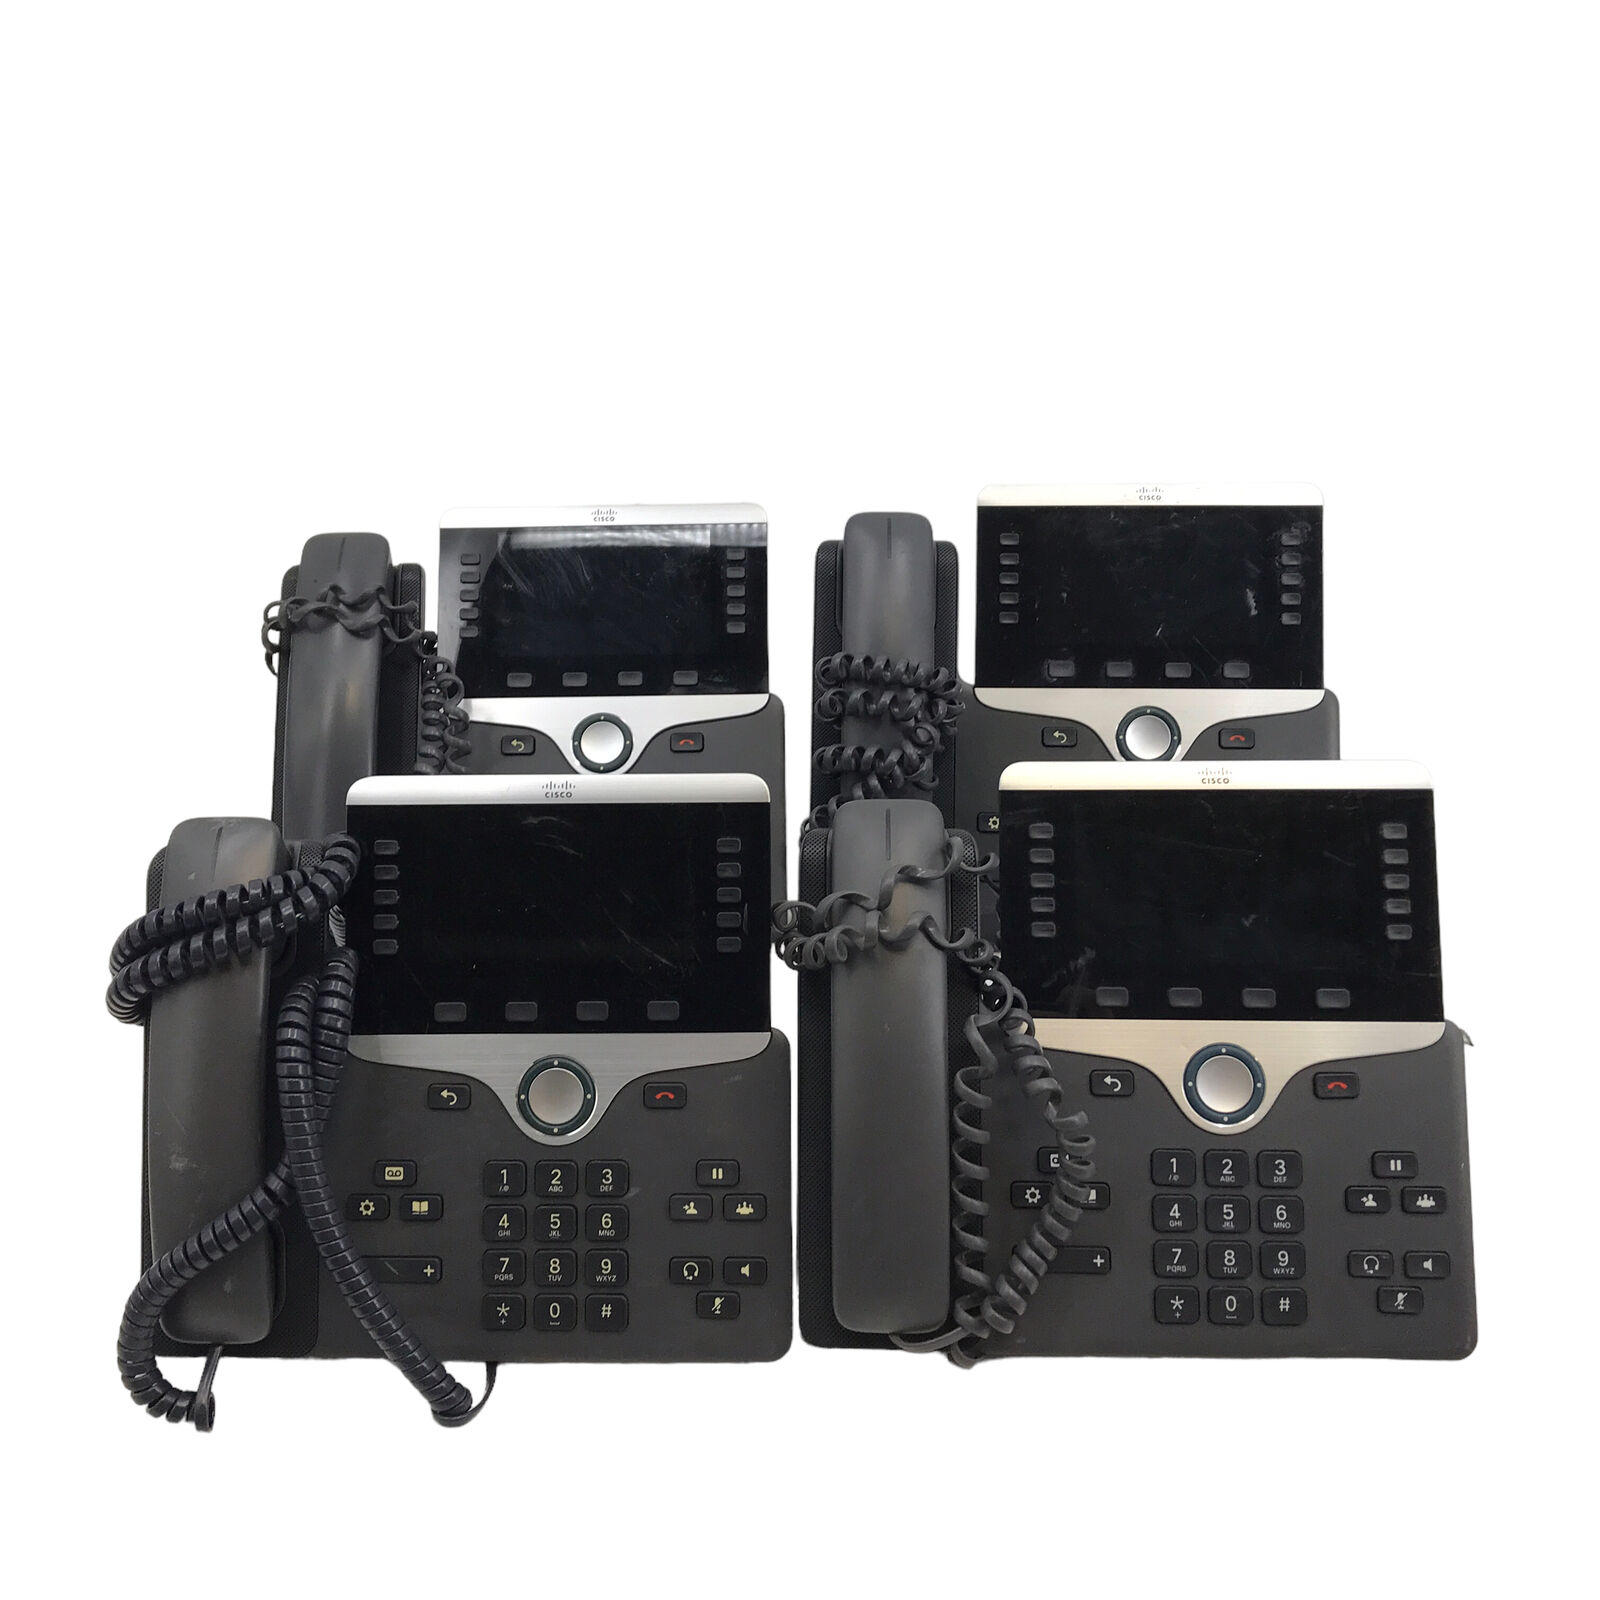 Lot of 4 Cisco CP-8811 8811 VoIP 5-Line Business Conference Phones #L8811